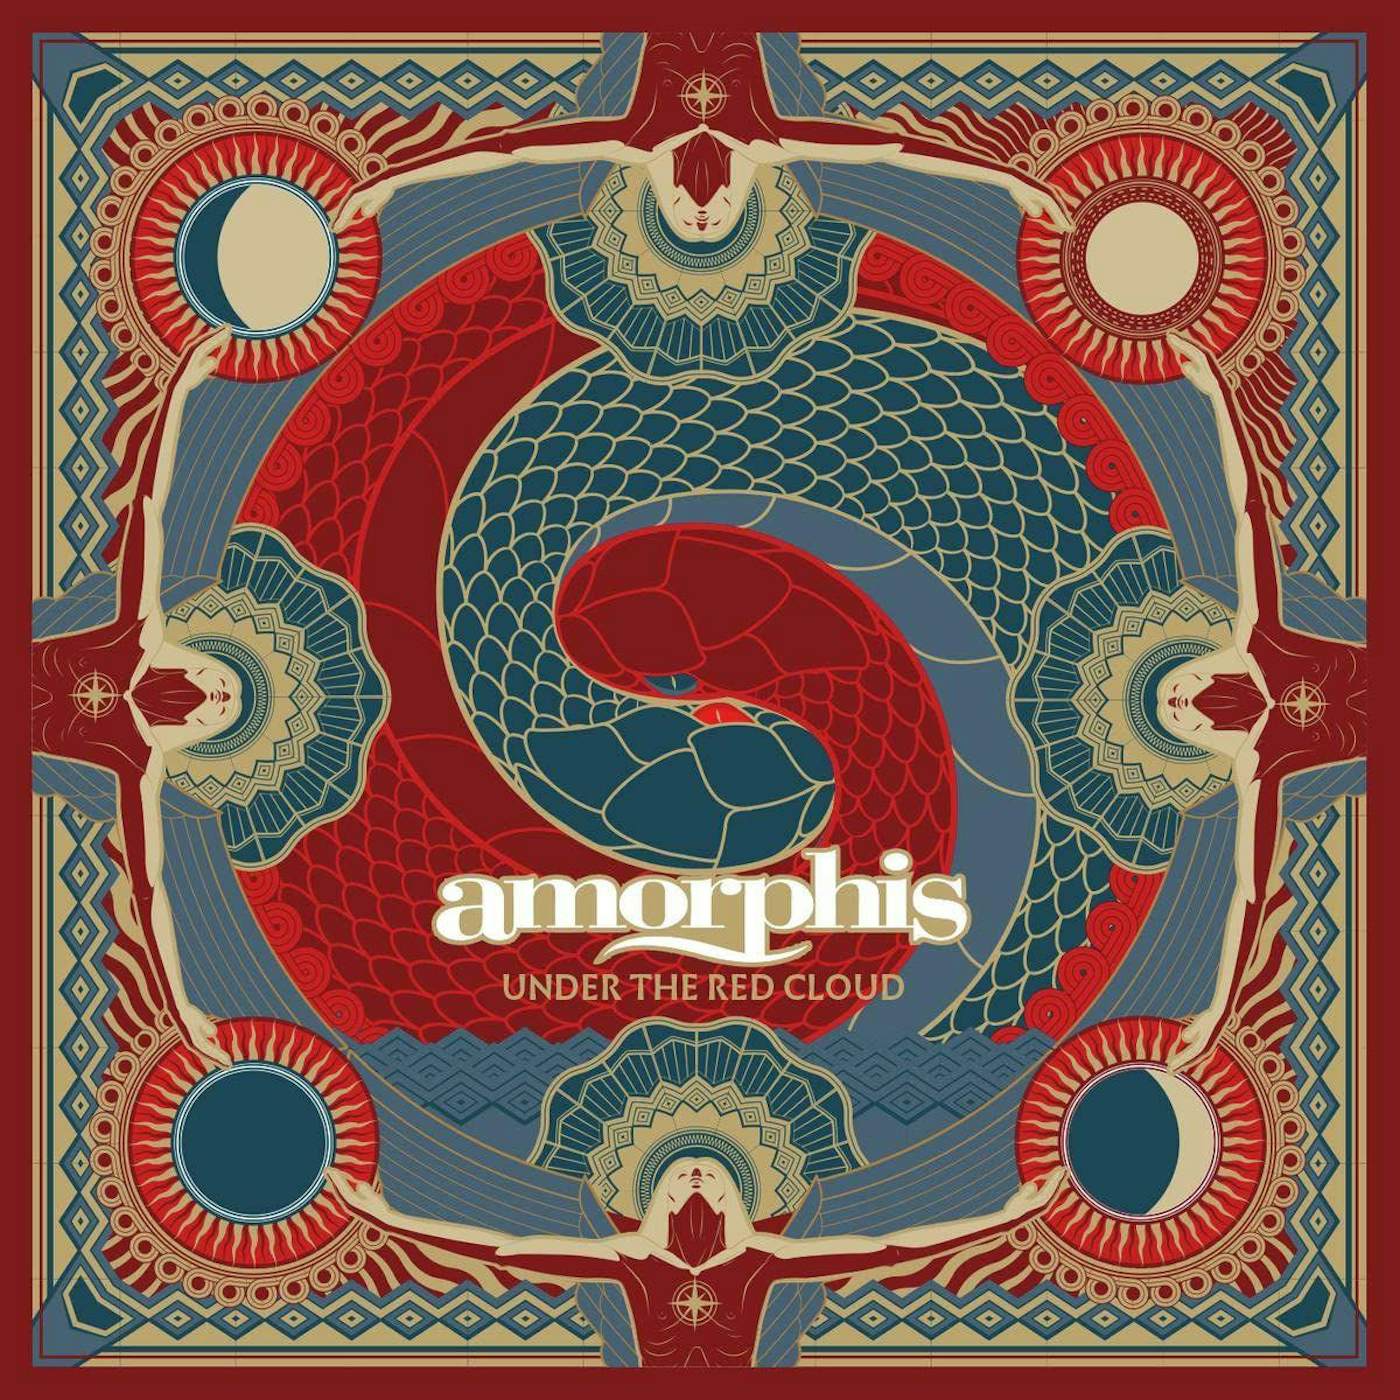 Amorphis Under The Red Cloud Vinyl Record